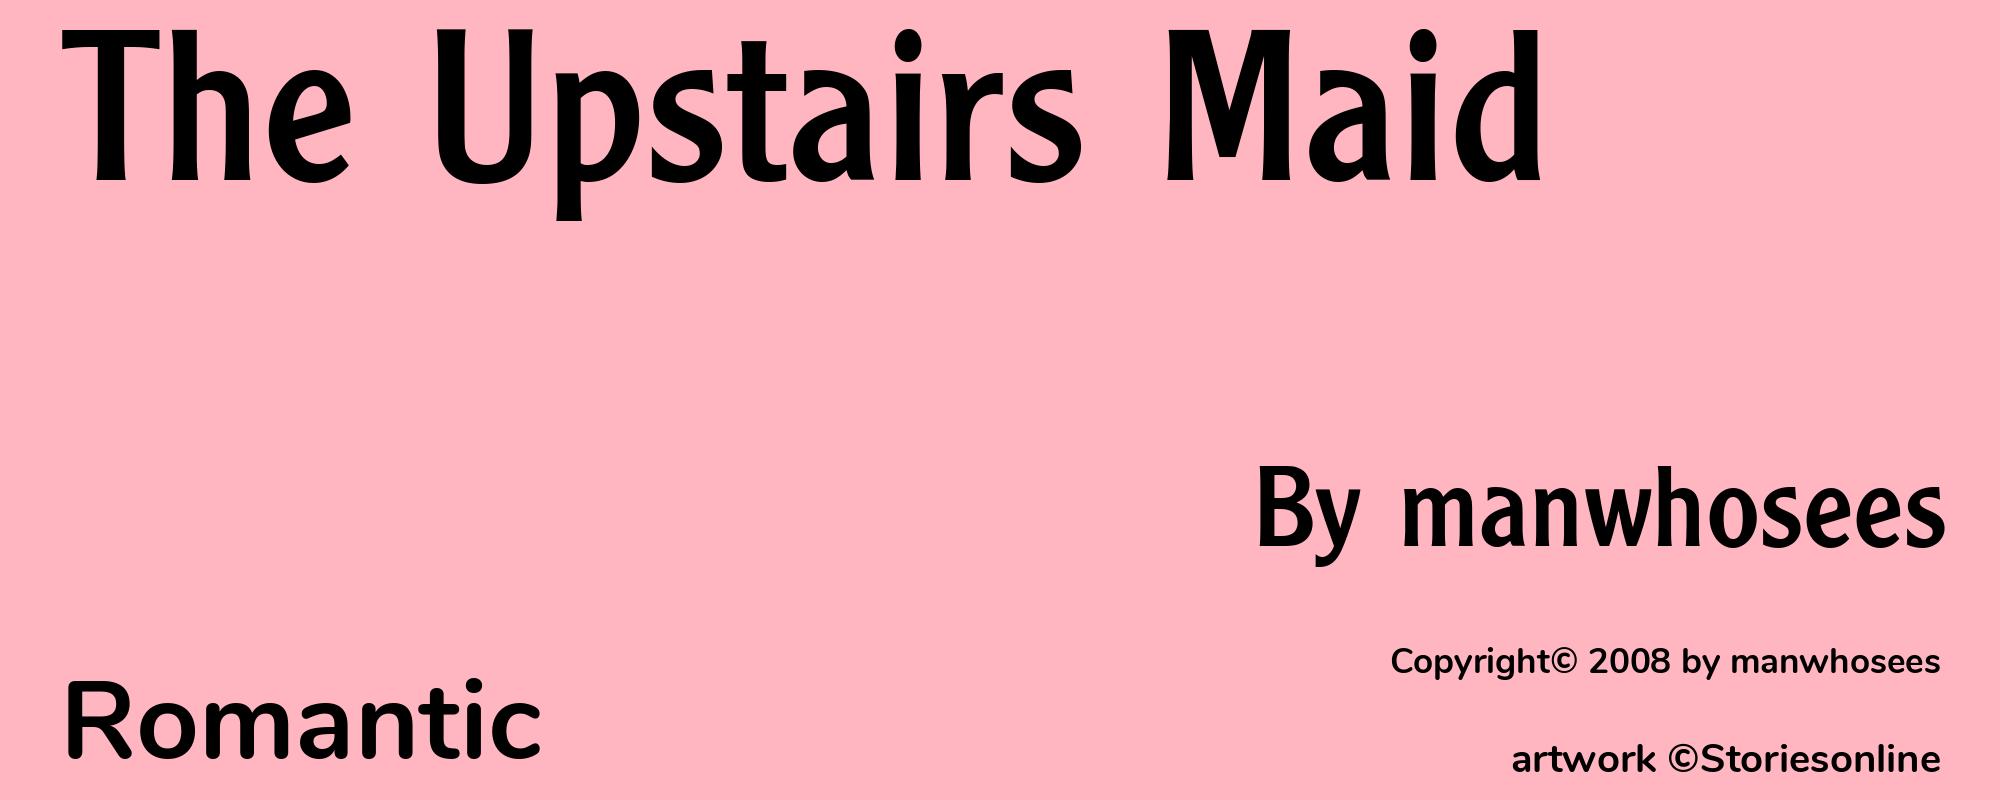 The Upstairs Maid - Cover